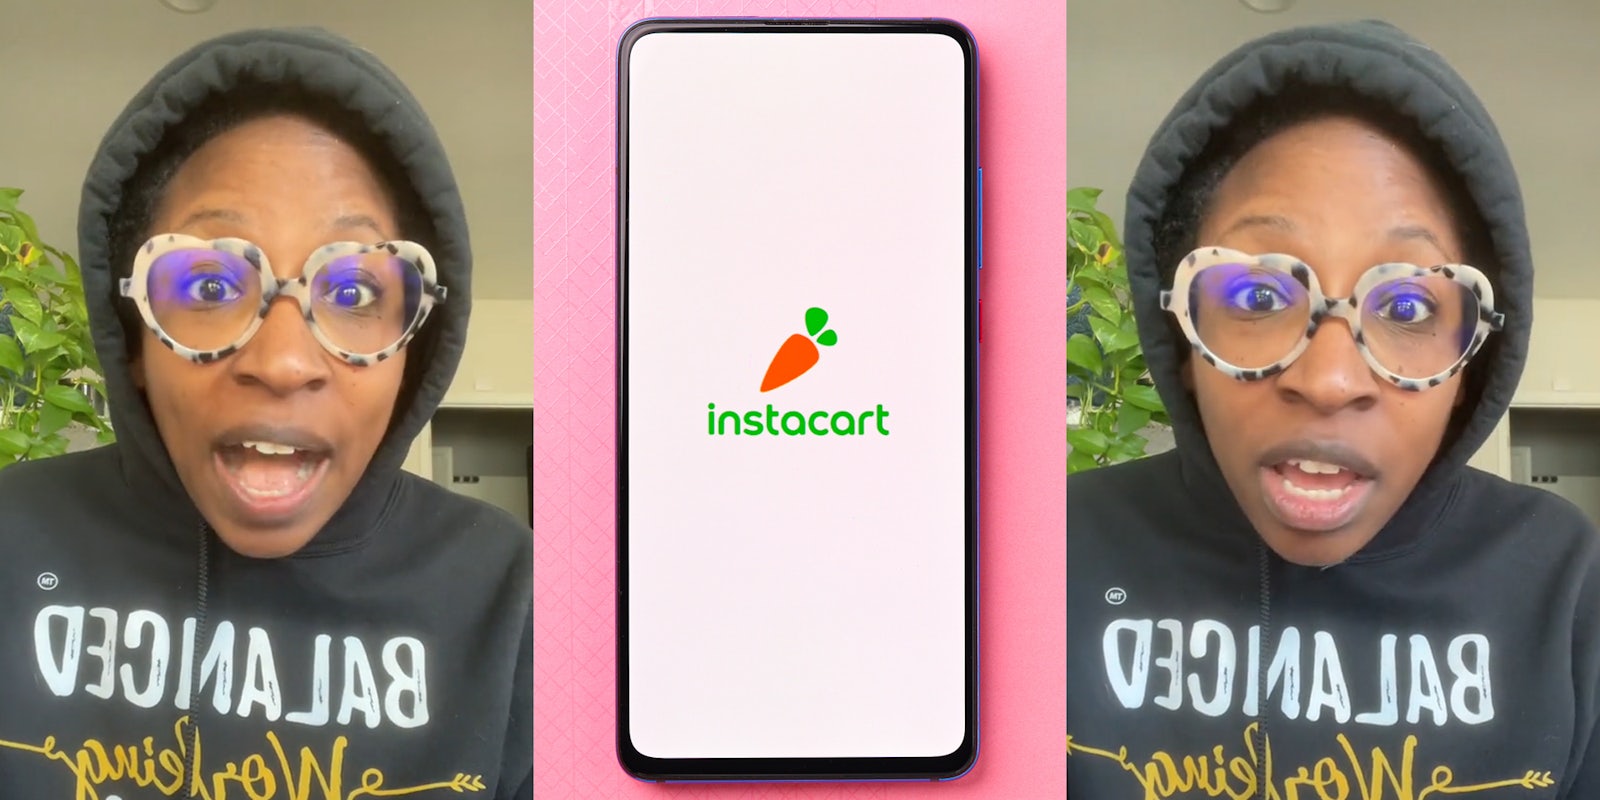 woman speaking in front of plant and tan walls (l) Instacart on phone on pink background (c) woman speaking in front of plant and tan walls (r)